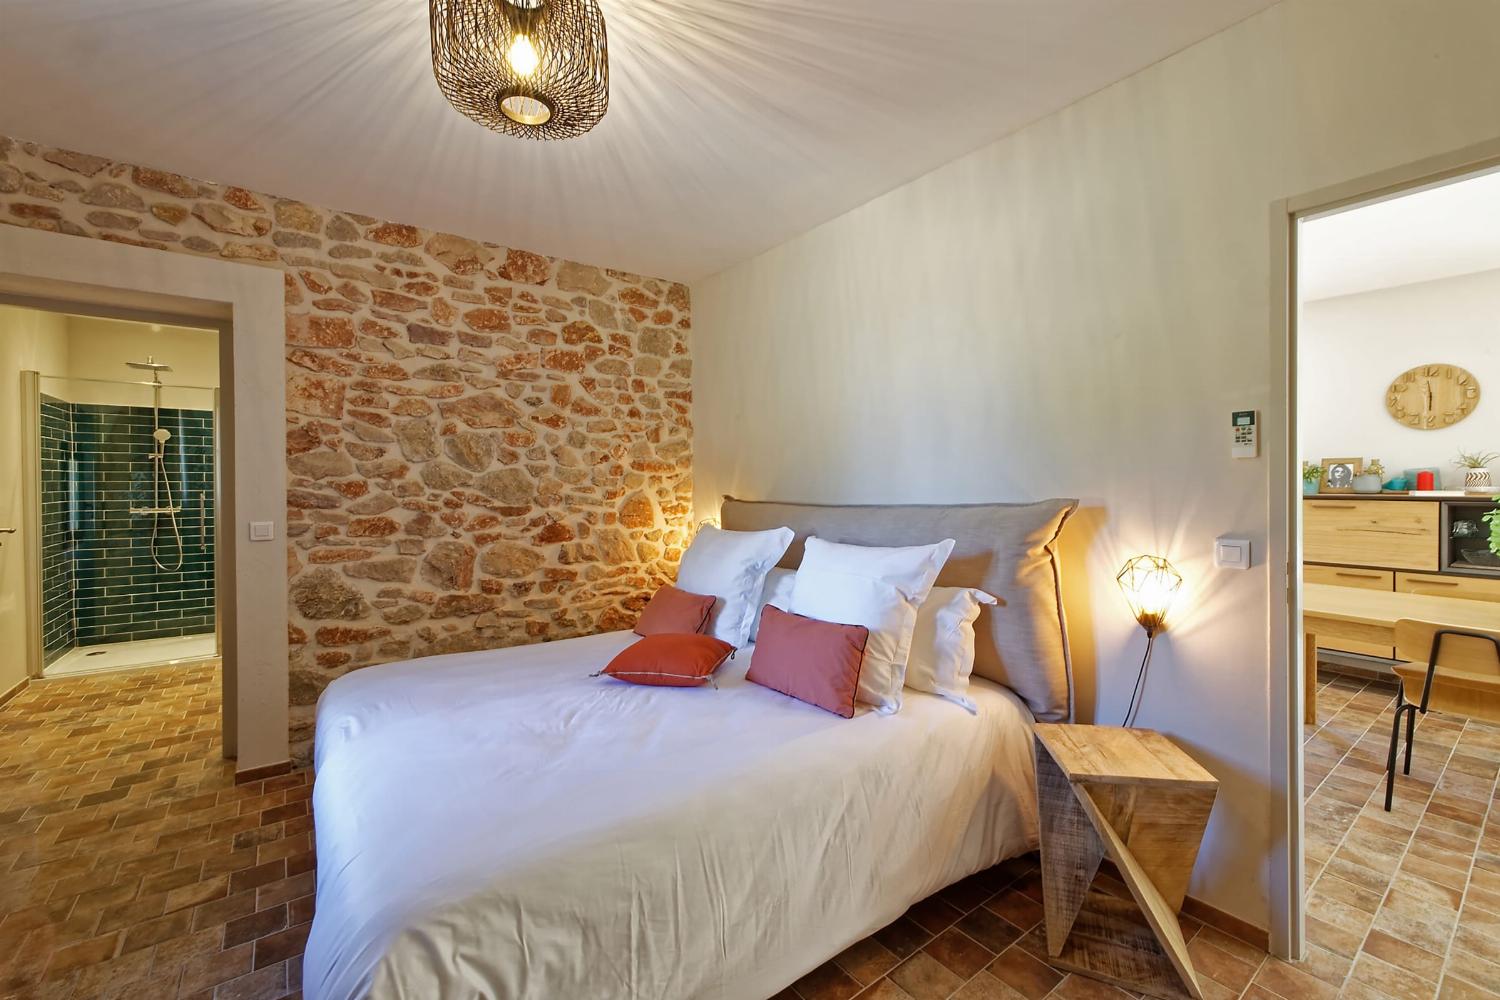 Bedroom | Provence holiday home